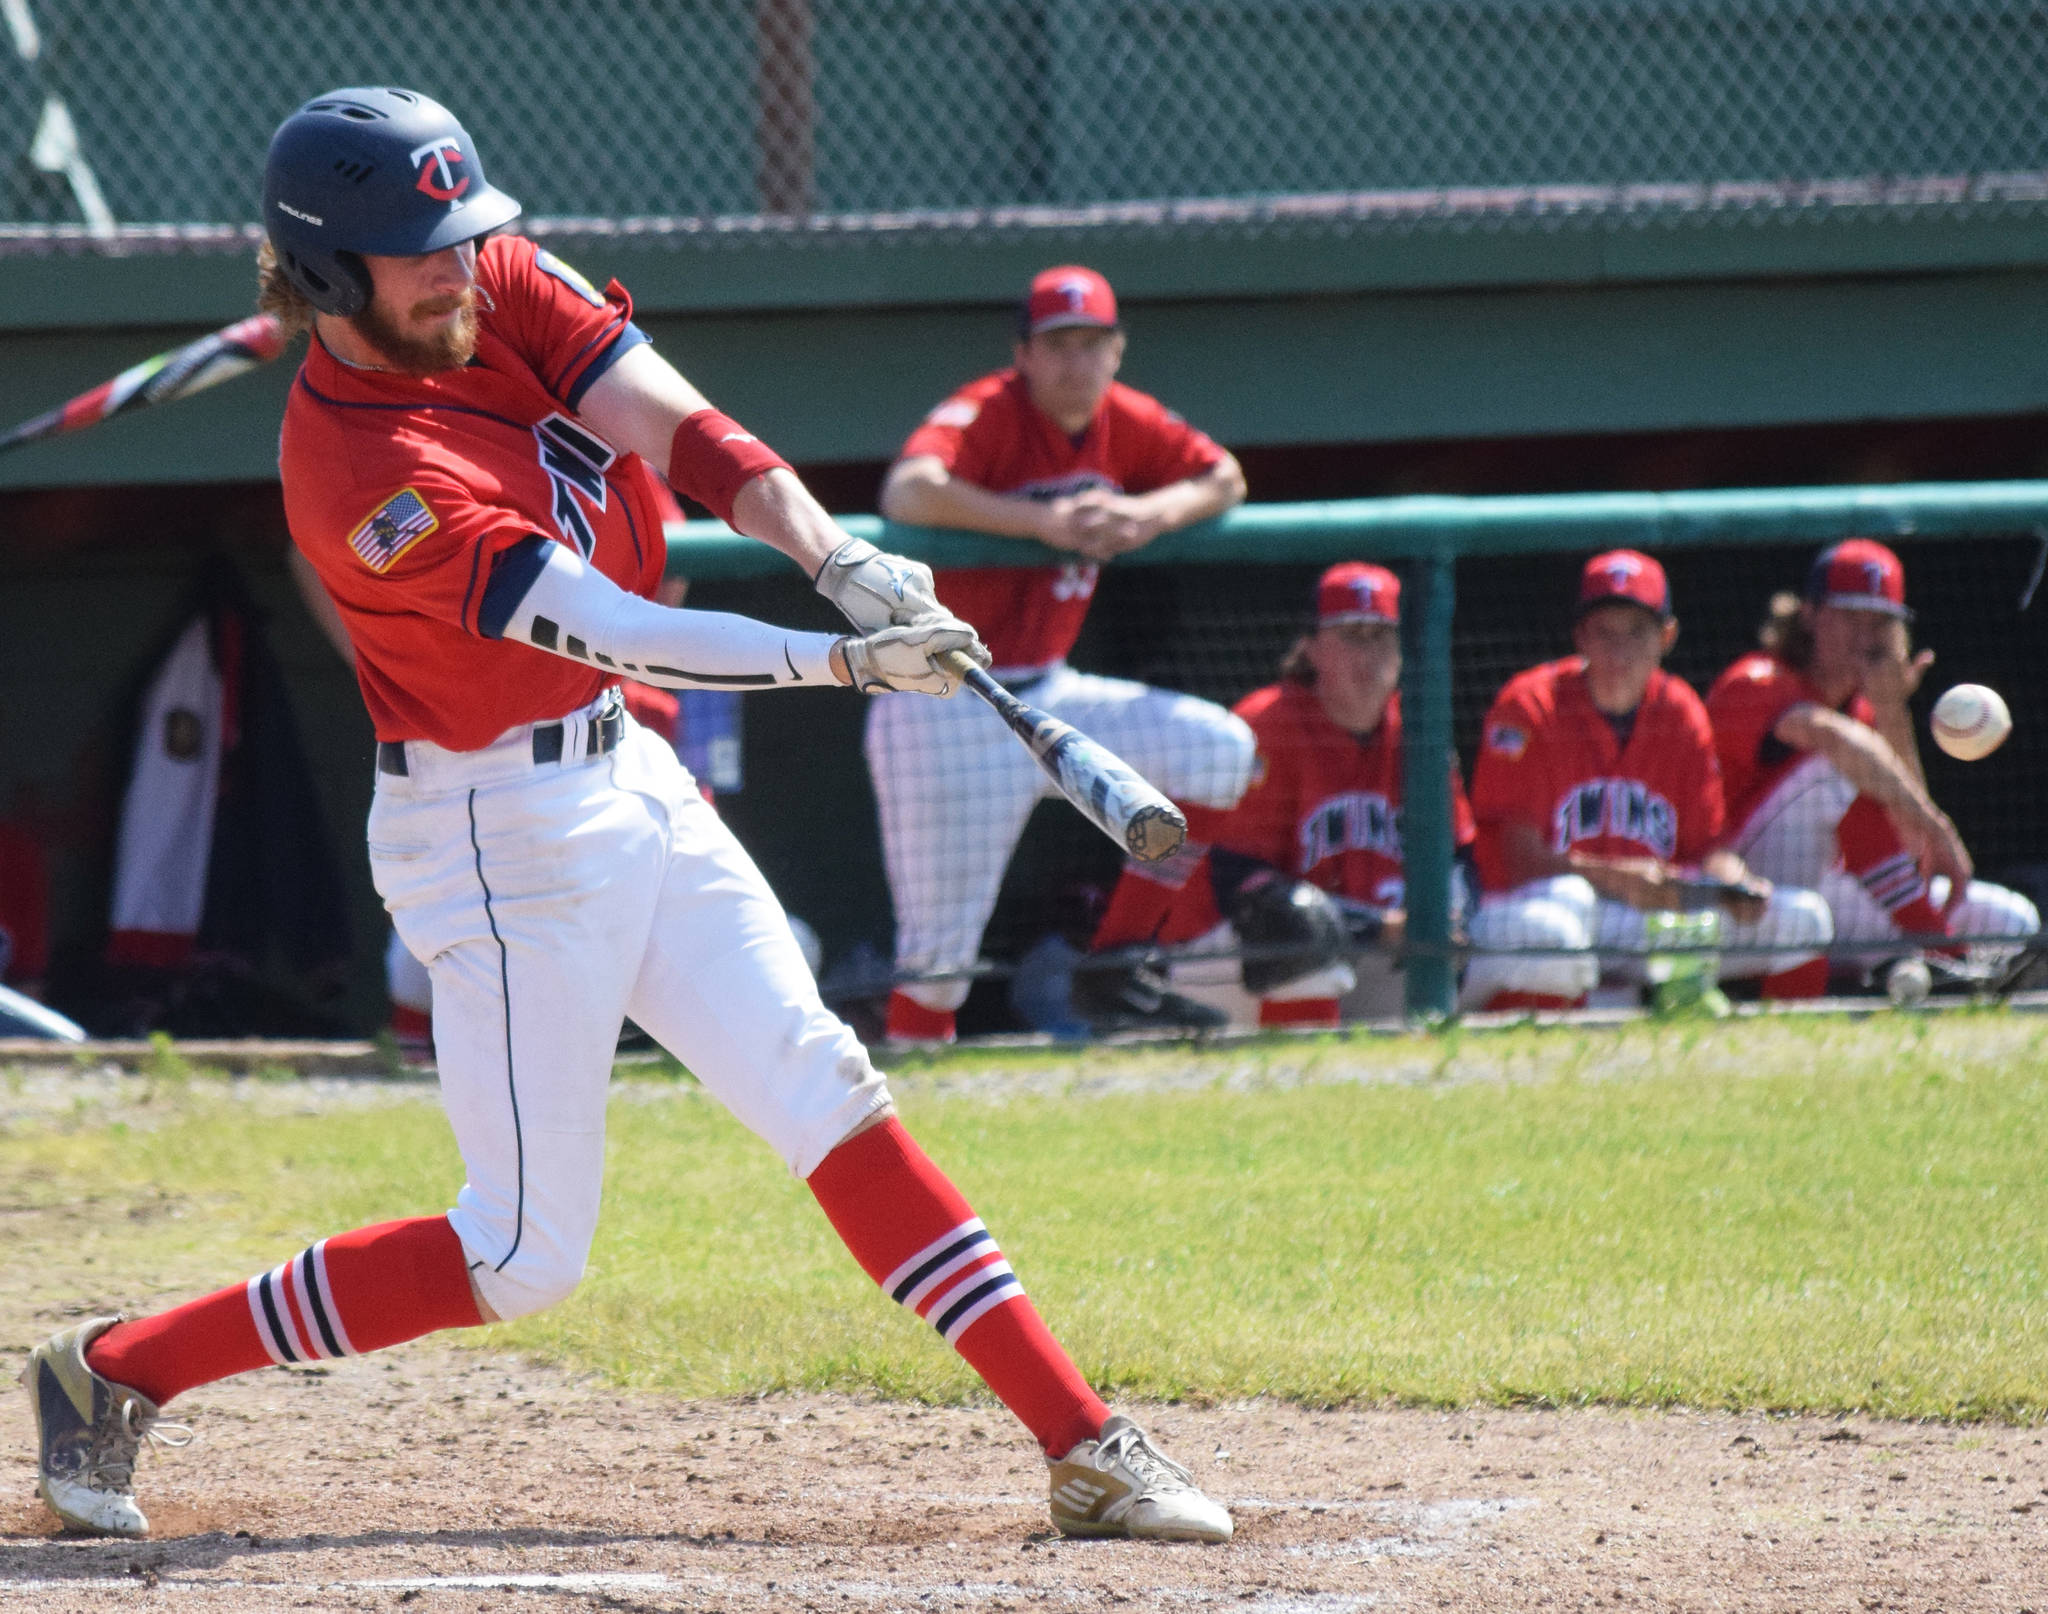 The Twins’ David Michael swings at a pitch by Service’s Andrew Jaidinger Saturday, June 22, 2019, at Coral Seymour Memorial Park in Kenai. (Photo by Joey Klecka/Peninsula Clarion)